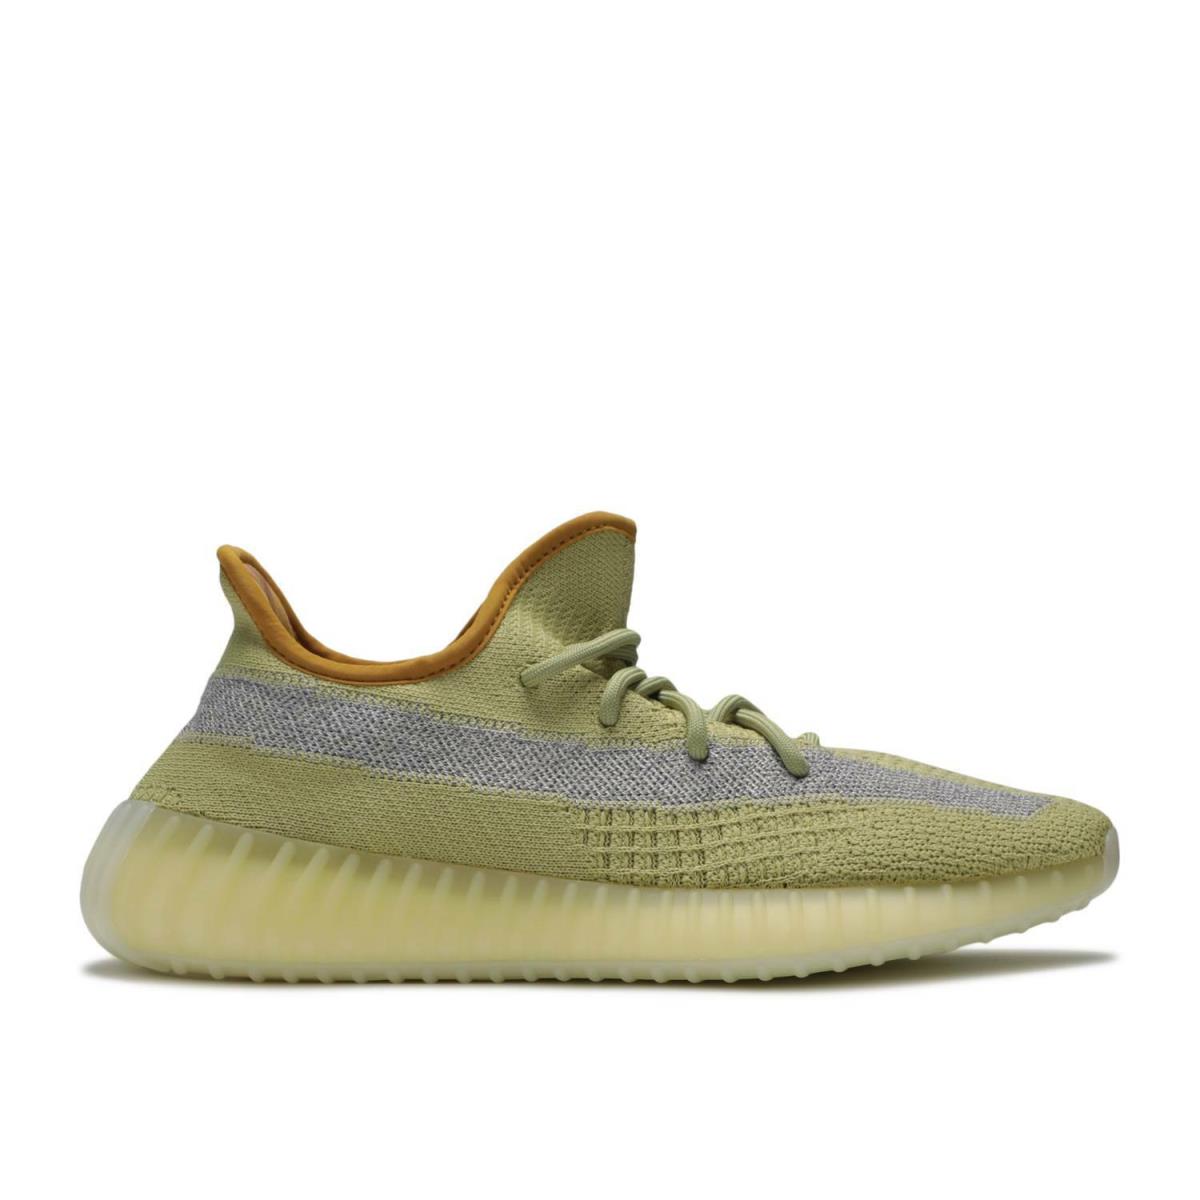 Adidas Men`s Yeezy Boost 350 V2 Marsh Athletic Fashion Sneakers FX9034 - yellow